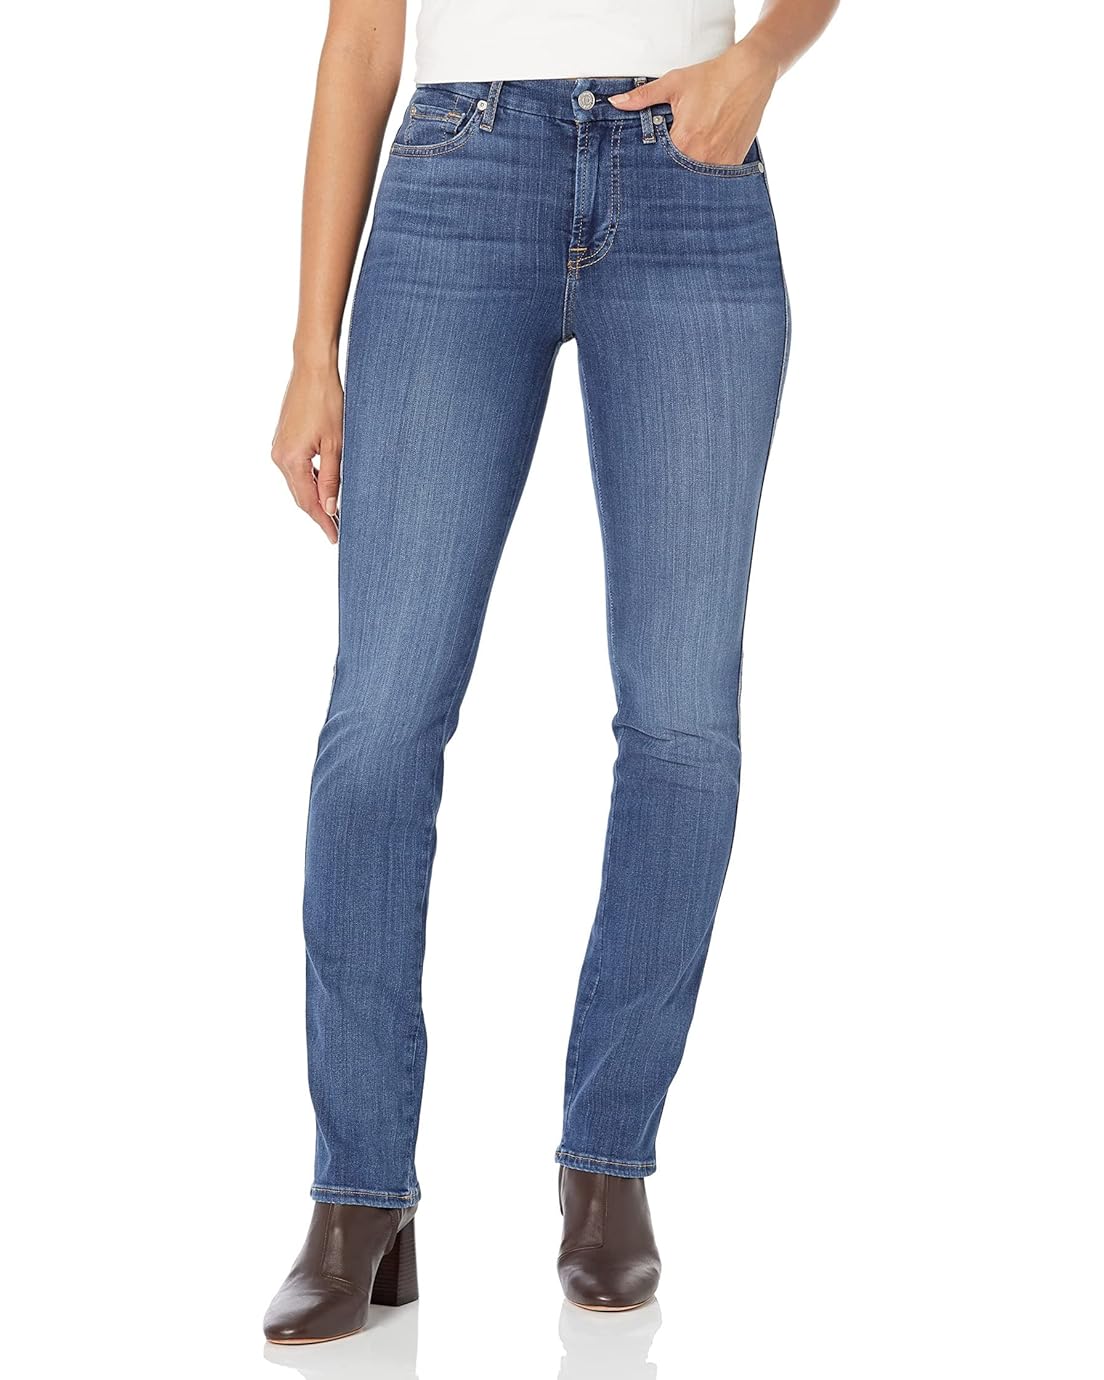 7 For All Mankind Kimmie Straight in Slim Illusion Love Story